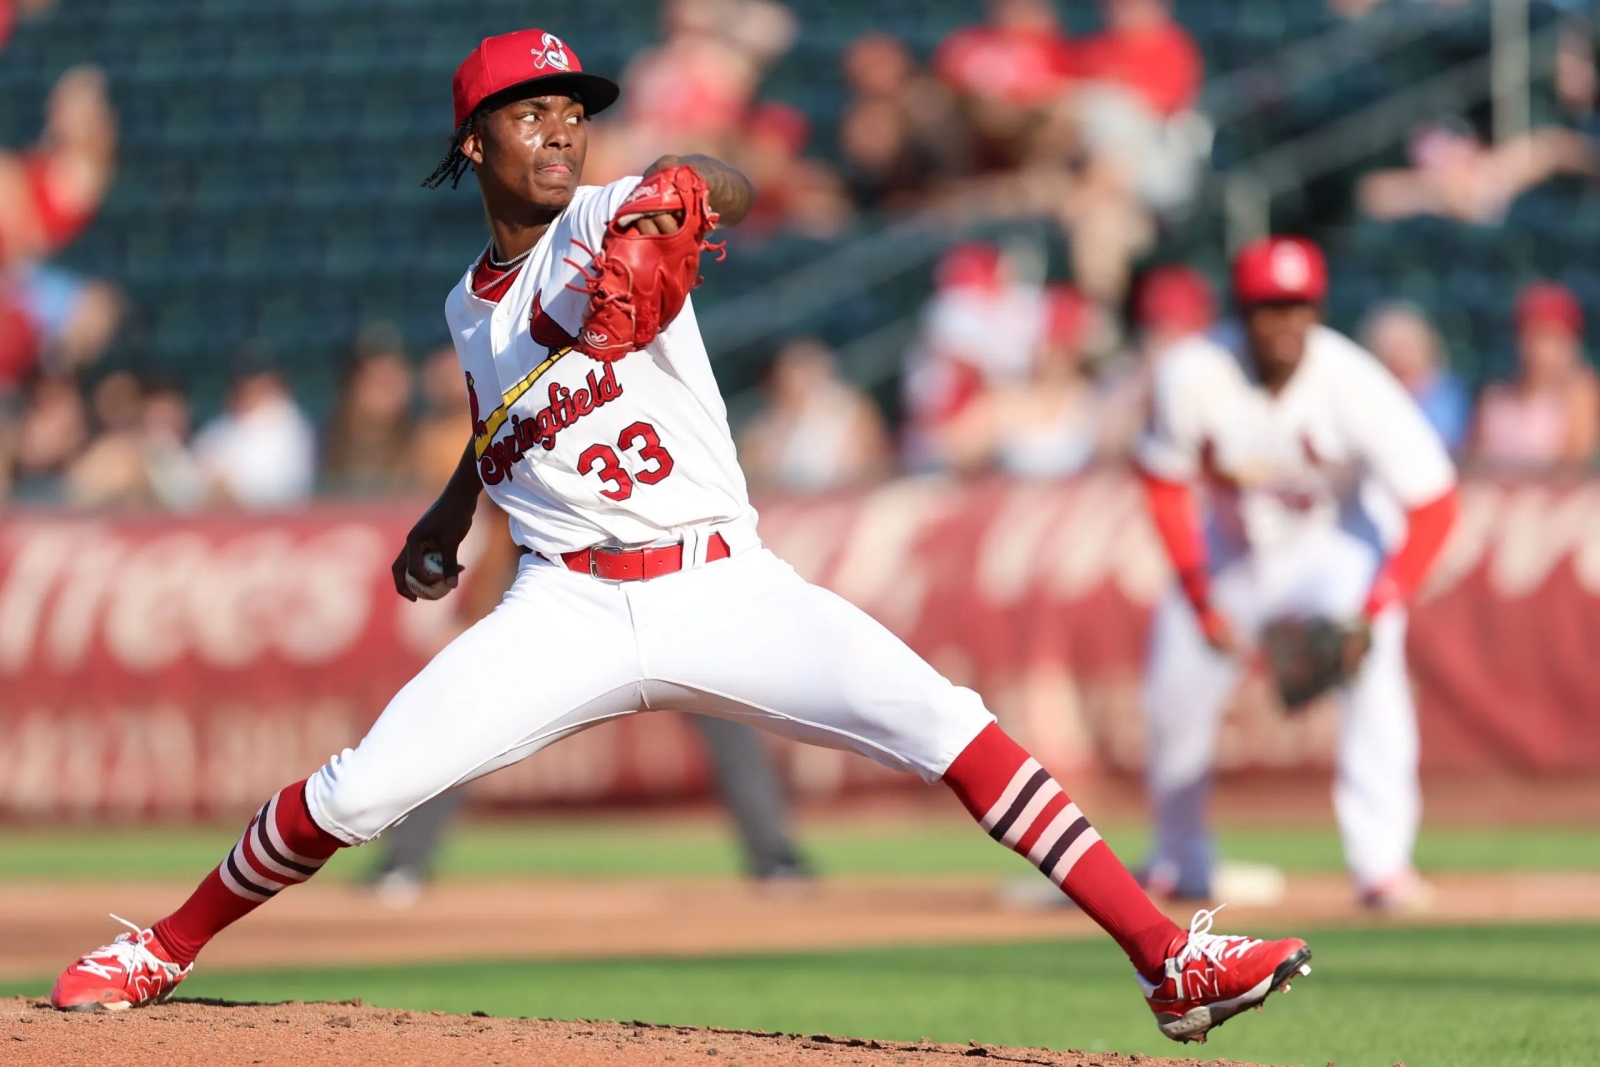 Tink Hence, wearing a Springfield Cardinals uniform, pitches during a game at Hammons Field